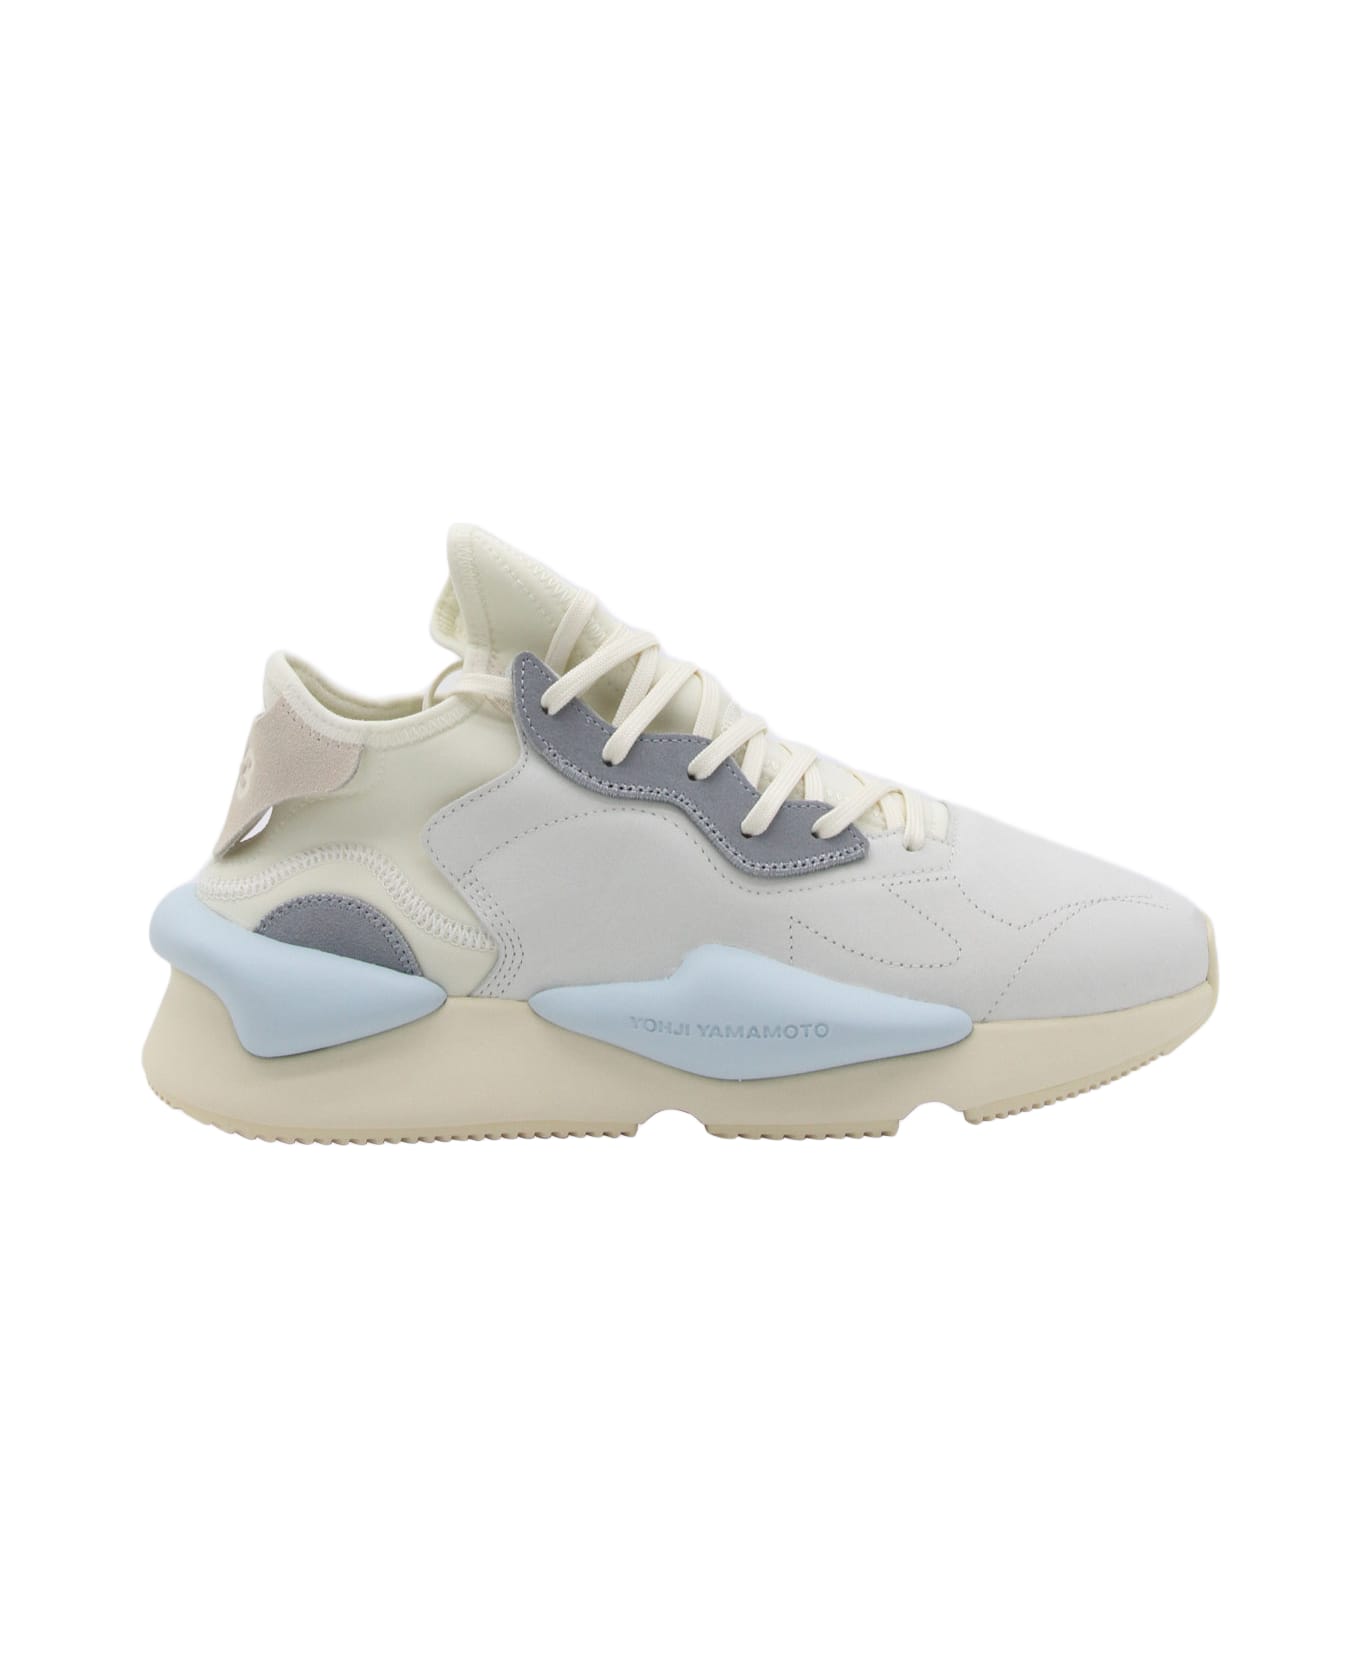 Y-3 Blue And White Leather Sneakera - OFF WHITE/CREAM WHITE/ICE BLUE